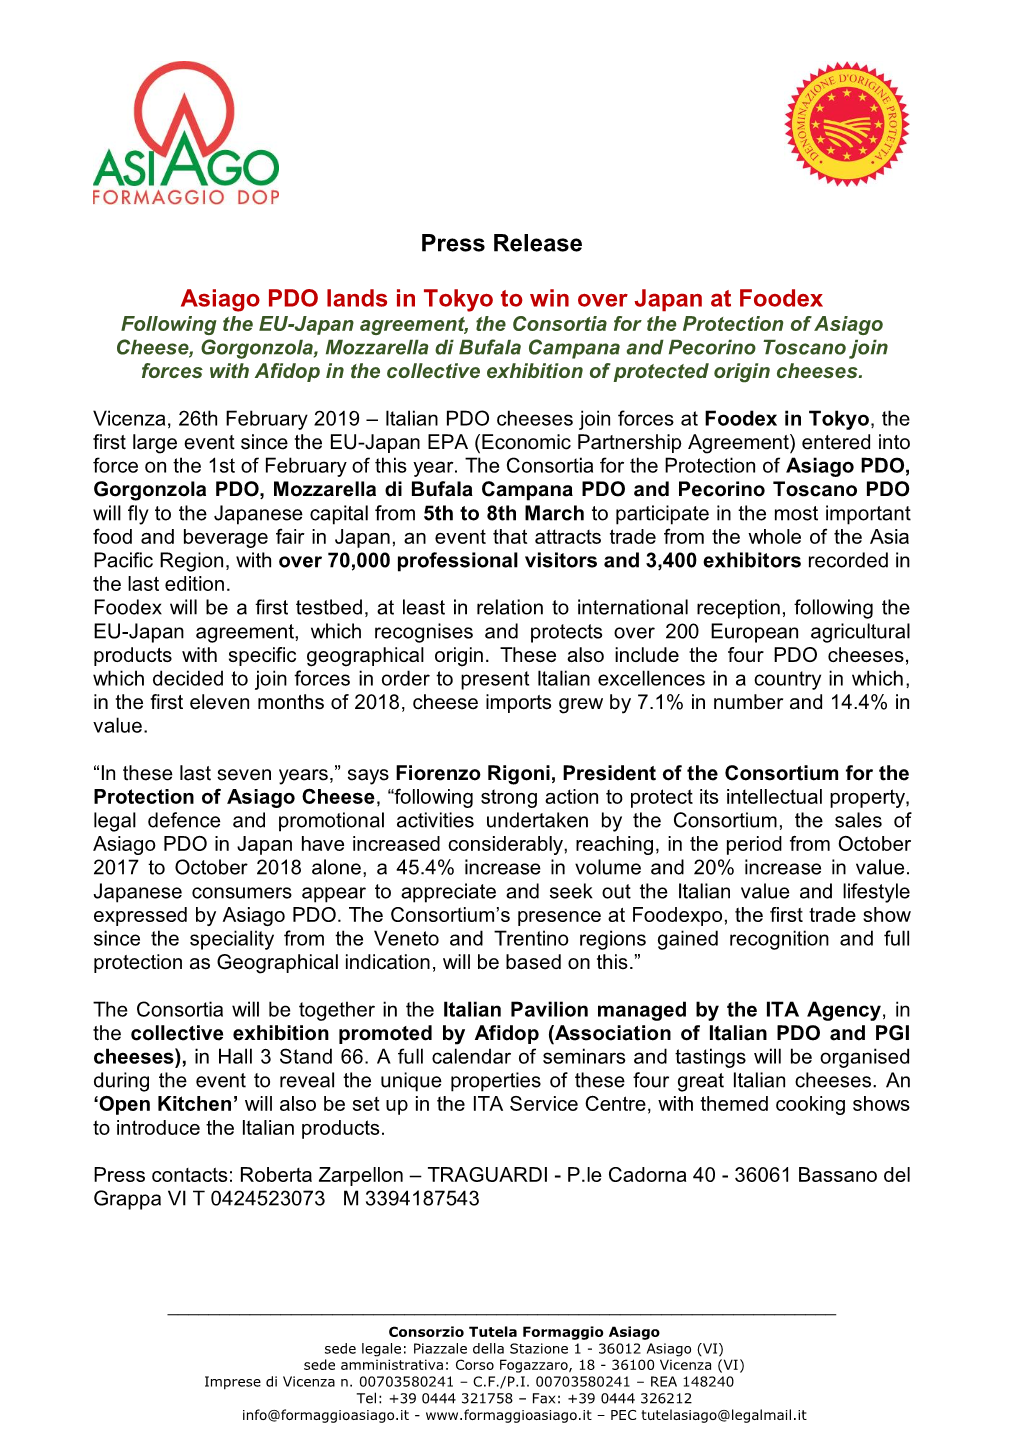 Press Release Asiago PDO Lands in Tokyo to Win Over Japan at Foodex